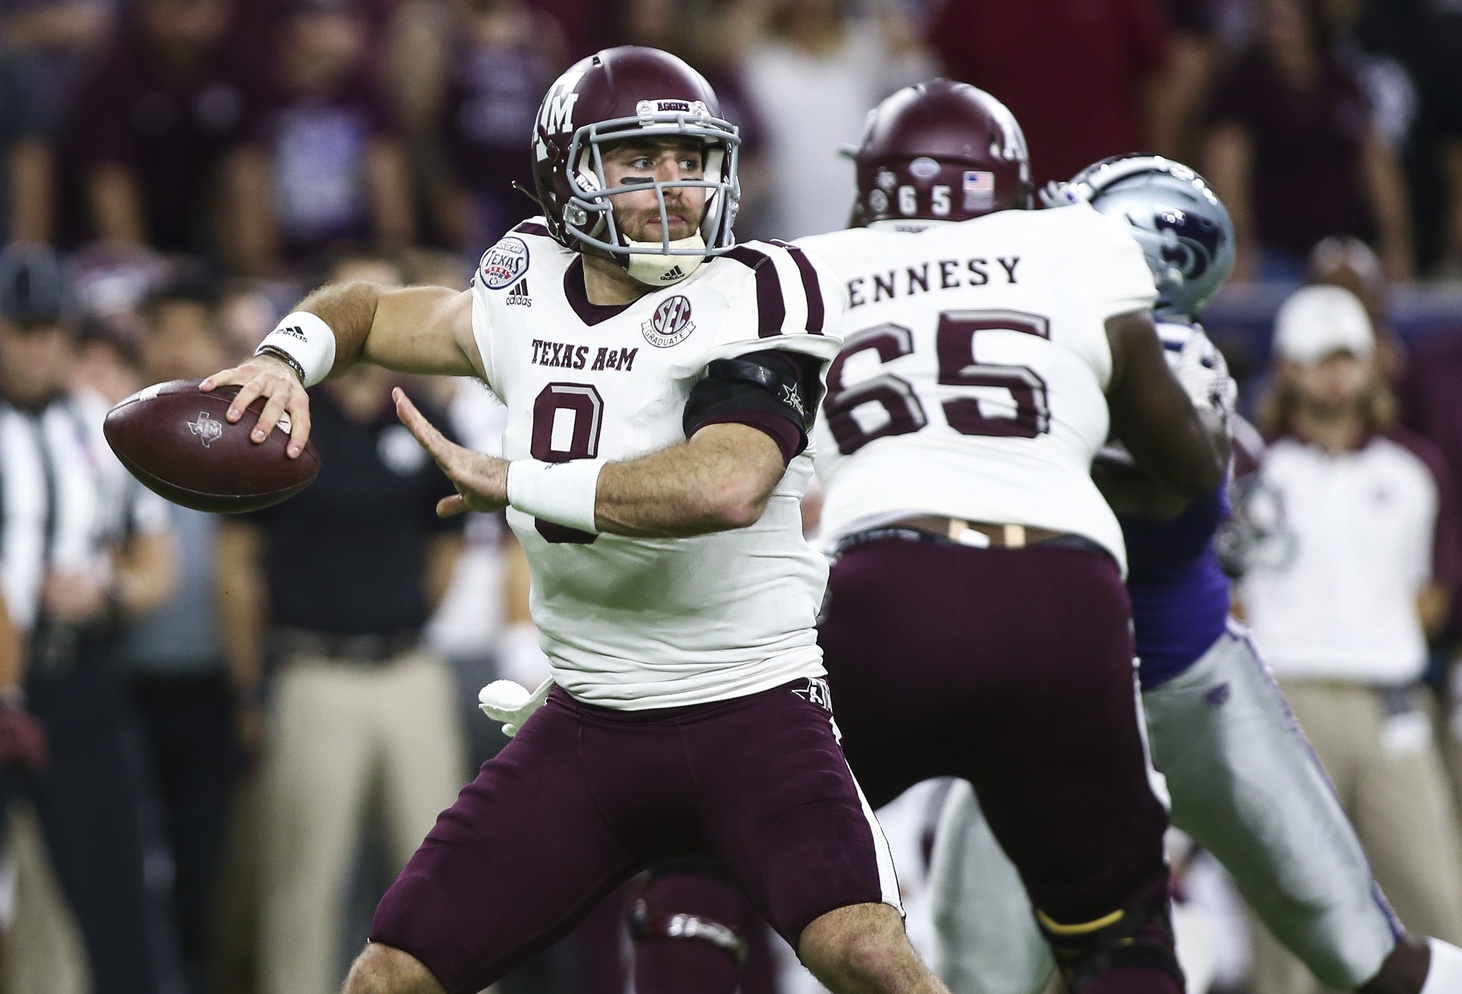 Dec 28, 2016; Houston, TX, USA; Texas A&M Aggies quarterback Trevor Knight (8) attempts a pass during the first quarter against the Kansas State Wildcats at NRG Stadium. Mandatory Credit: Troy Taormina-USA TODAY Sports